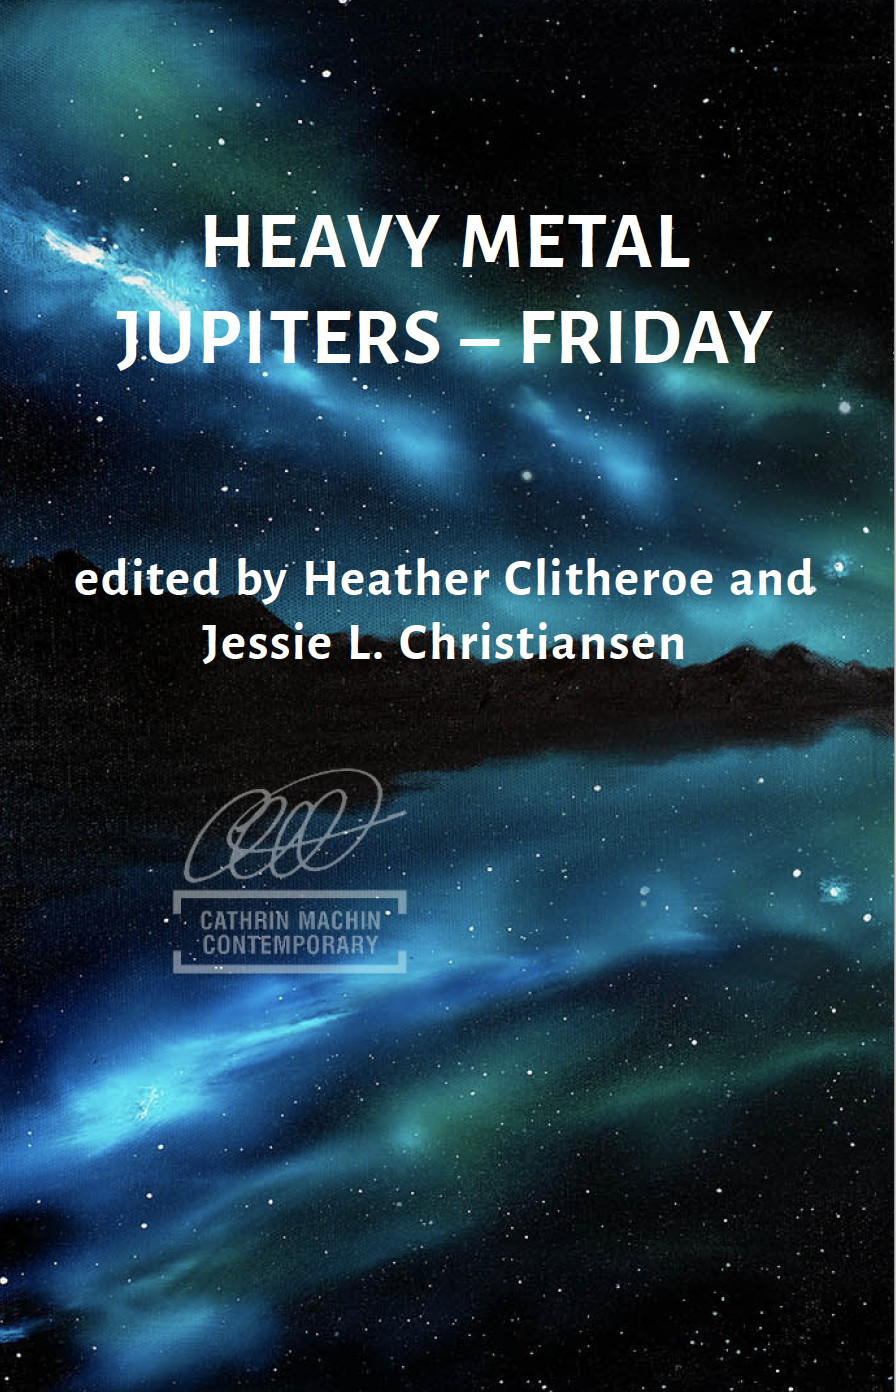 Heavy Metal Jupiters and Other Places - Friday